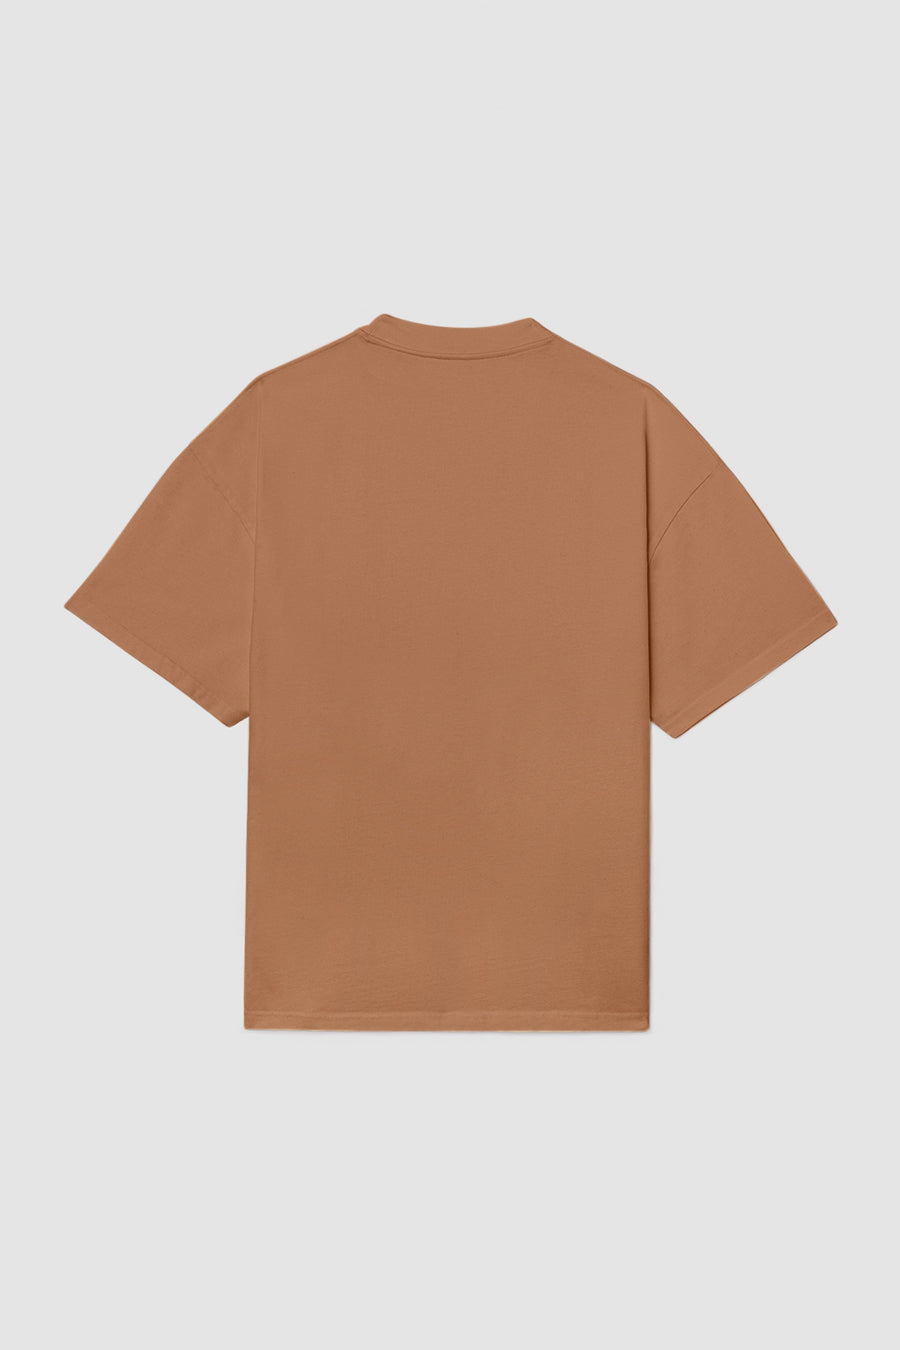 Hazel Brown T-Shirt - only available in wholesale